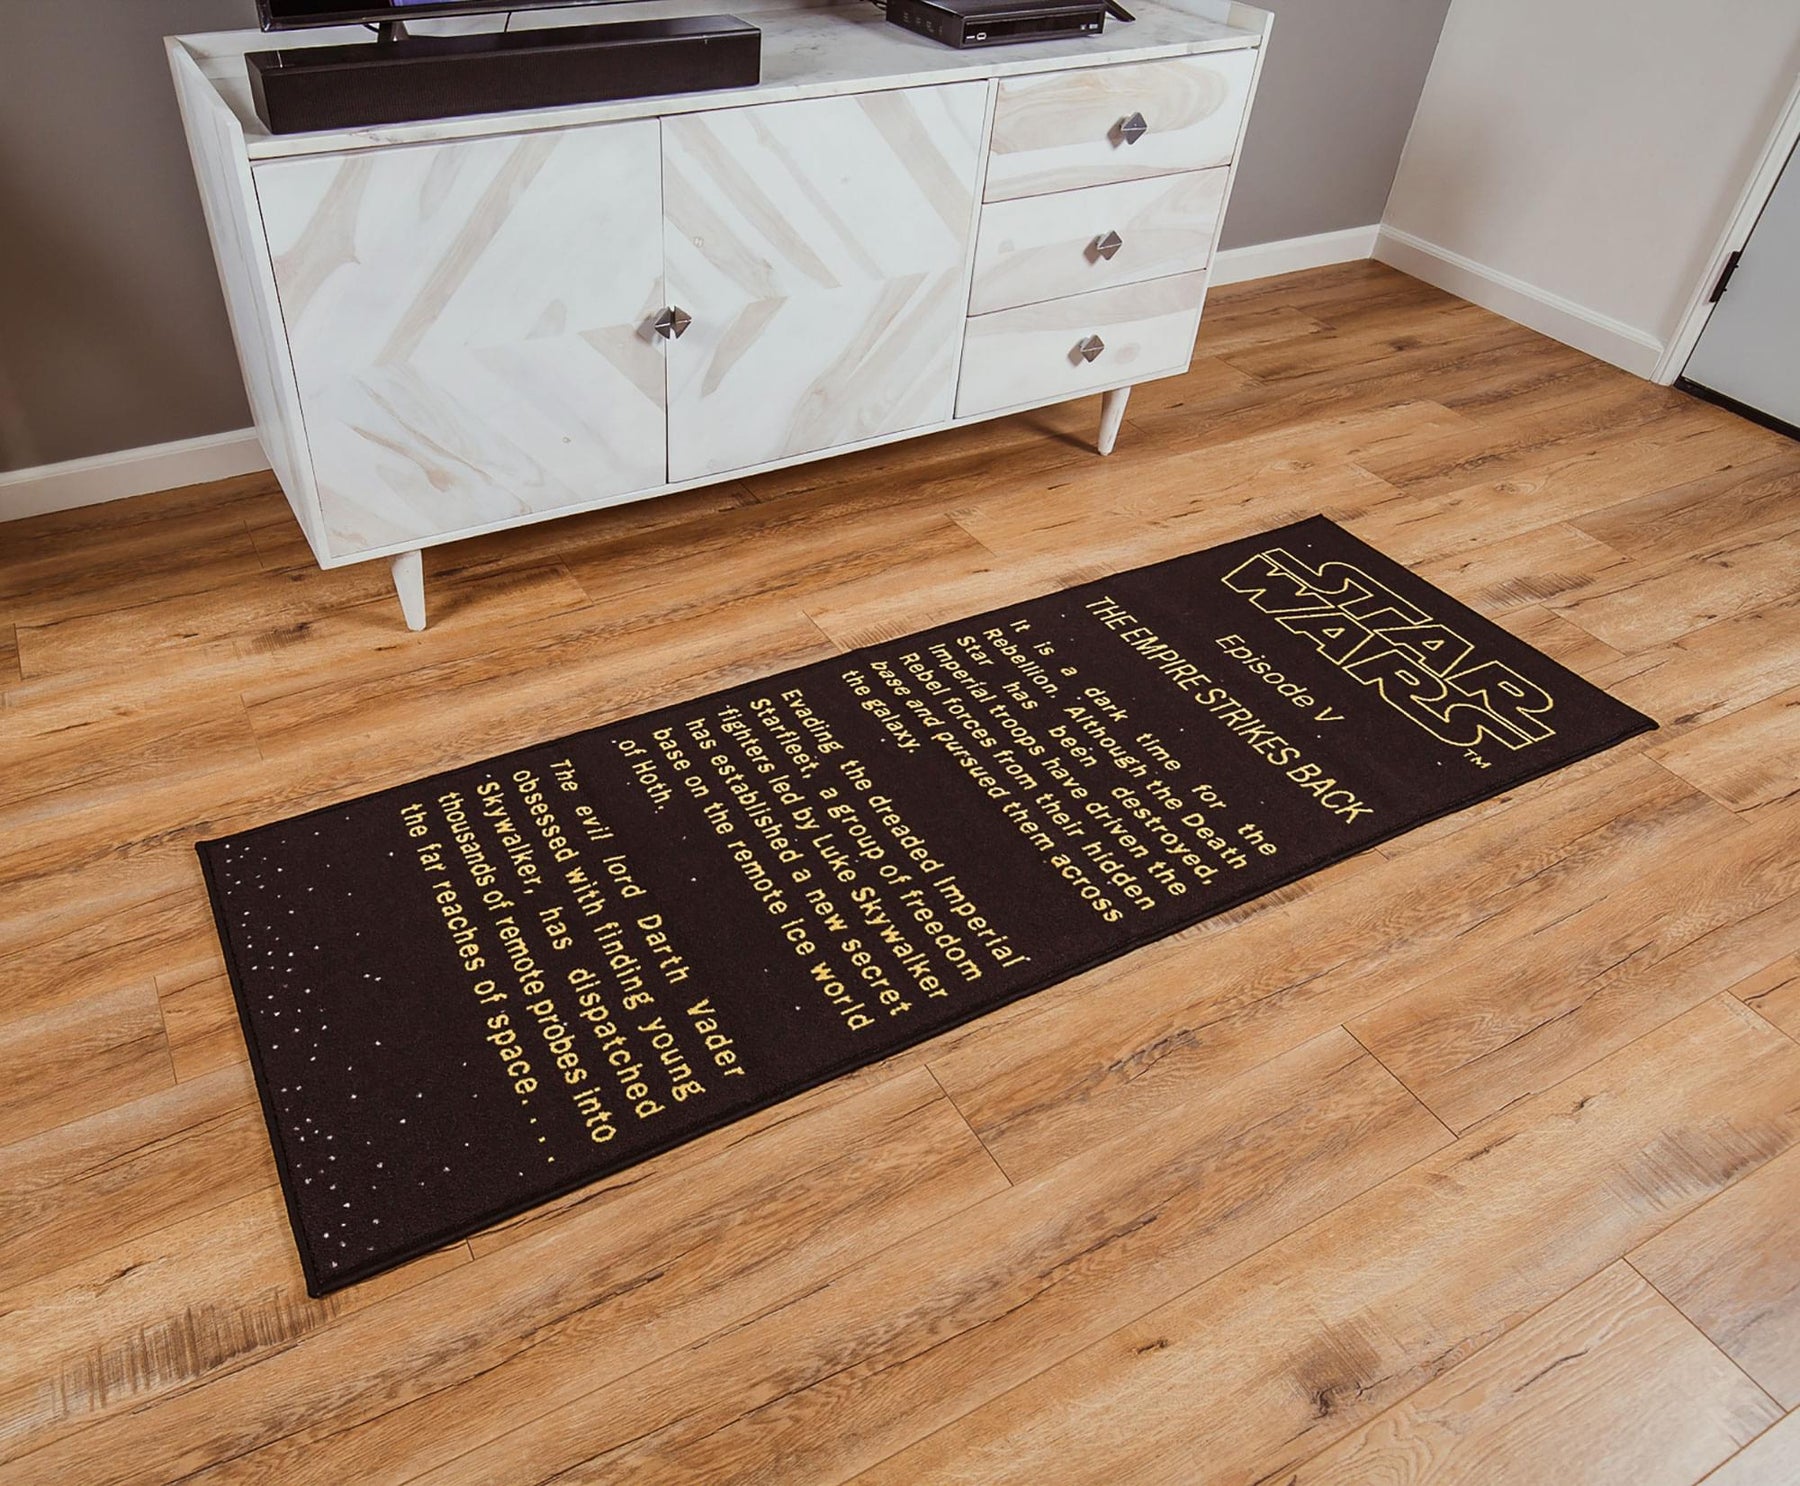 Star Wars: The Empire Strikes Back Title Crawl Printed Area Rug | 27 x 77 Inches